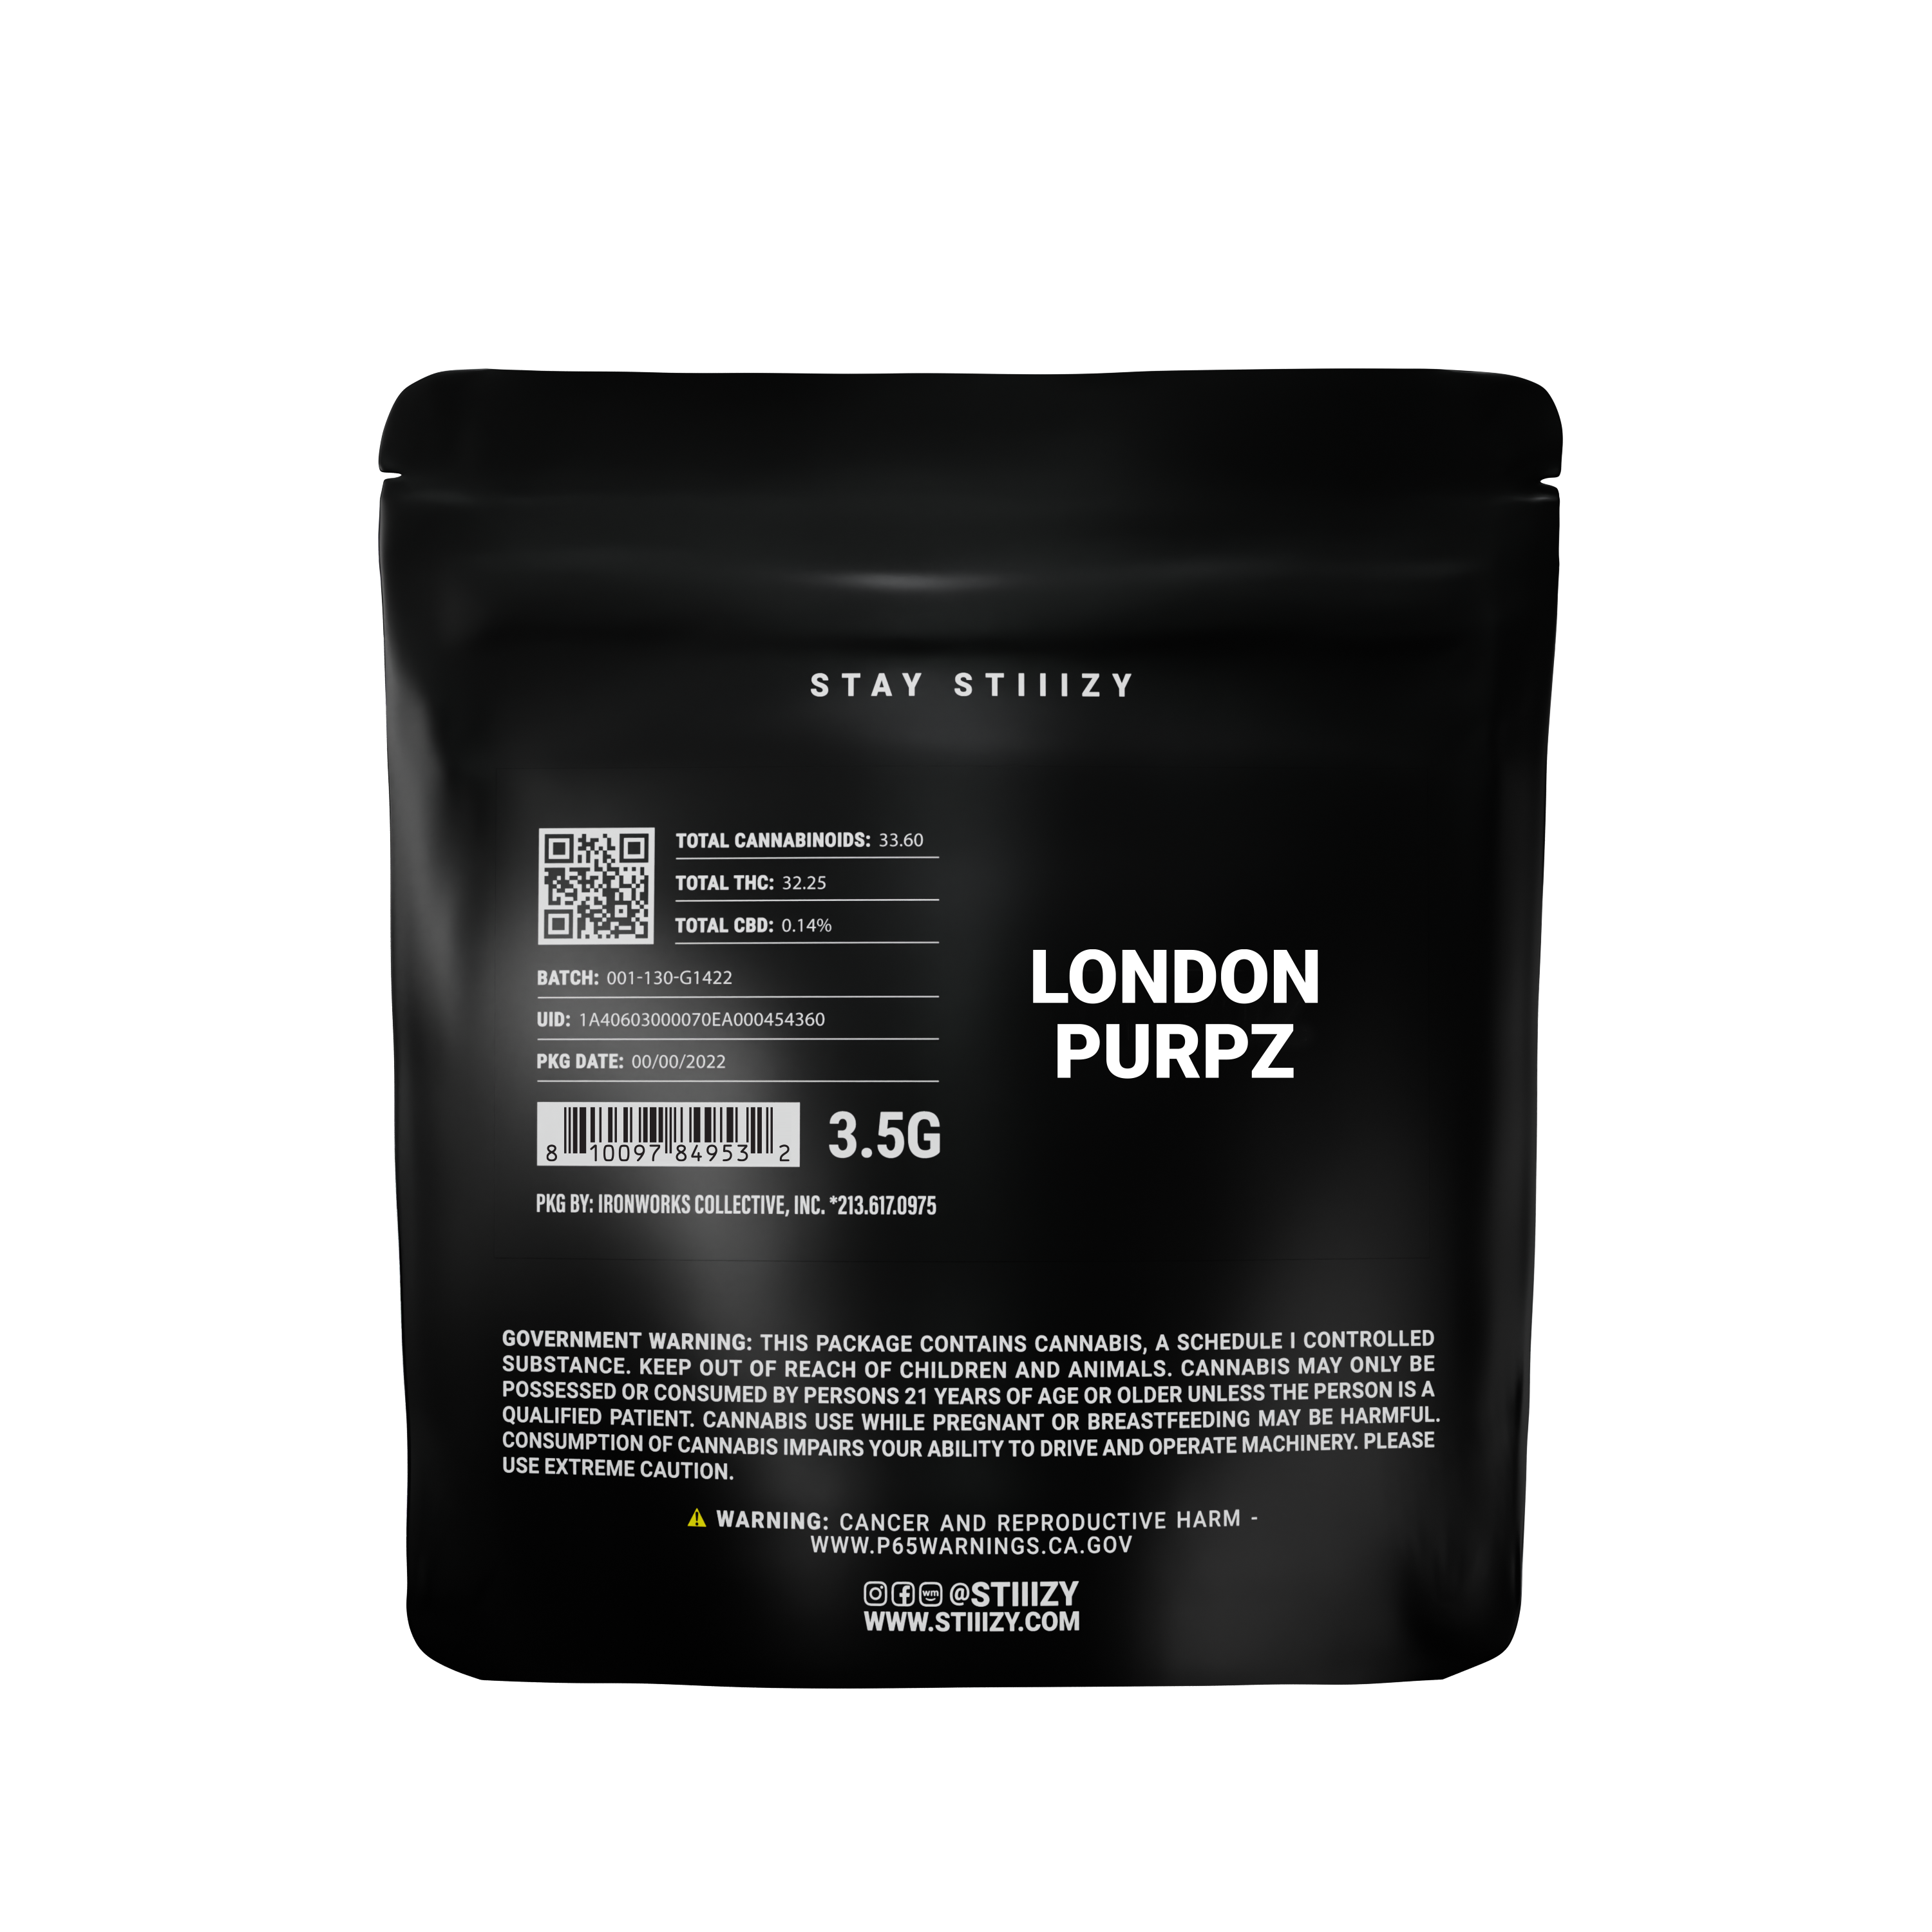 A black label bag showcases 3.5 grams of cannabis flower from the London Purpz strain.